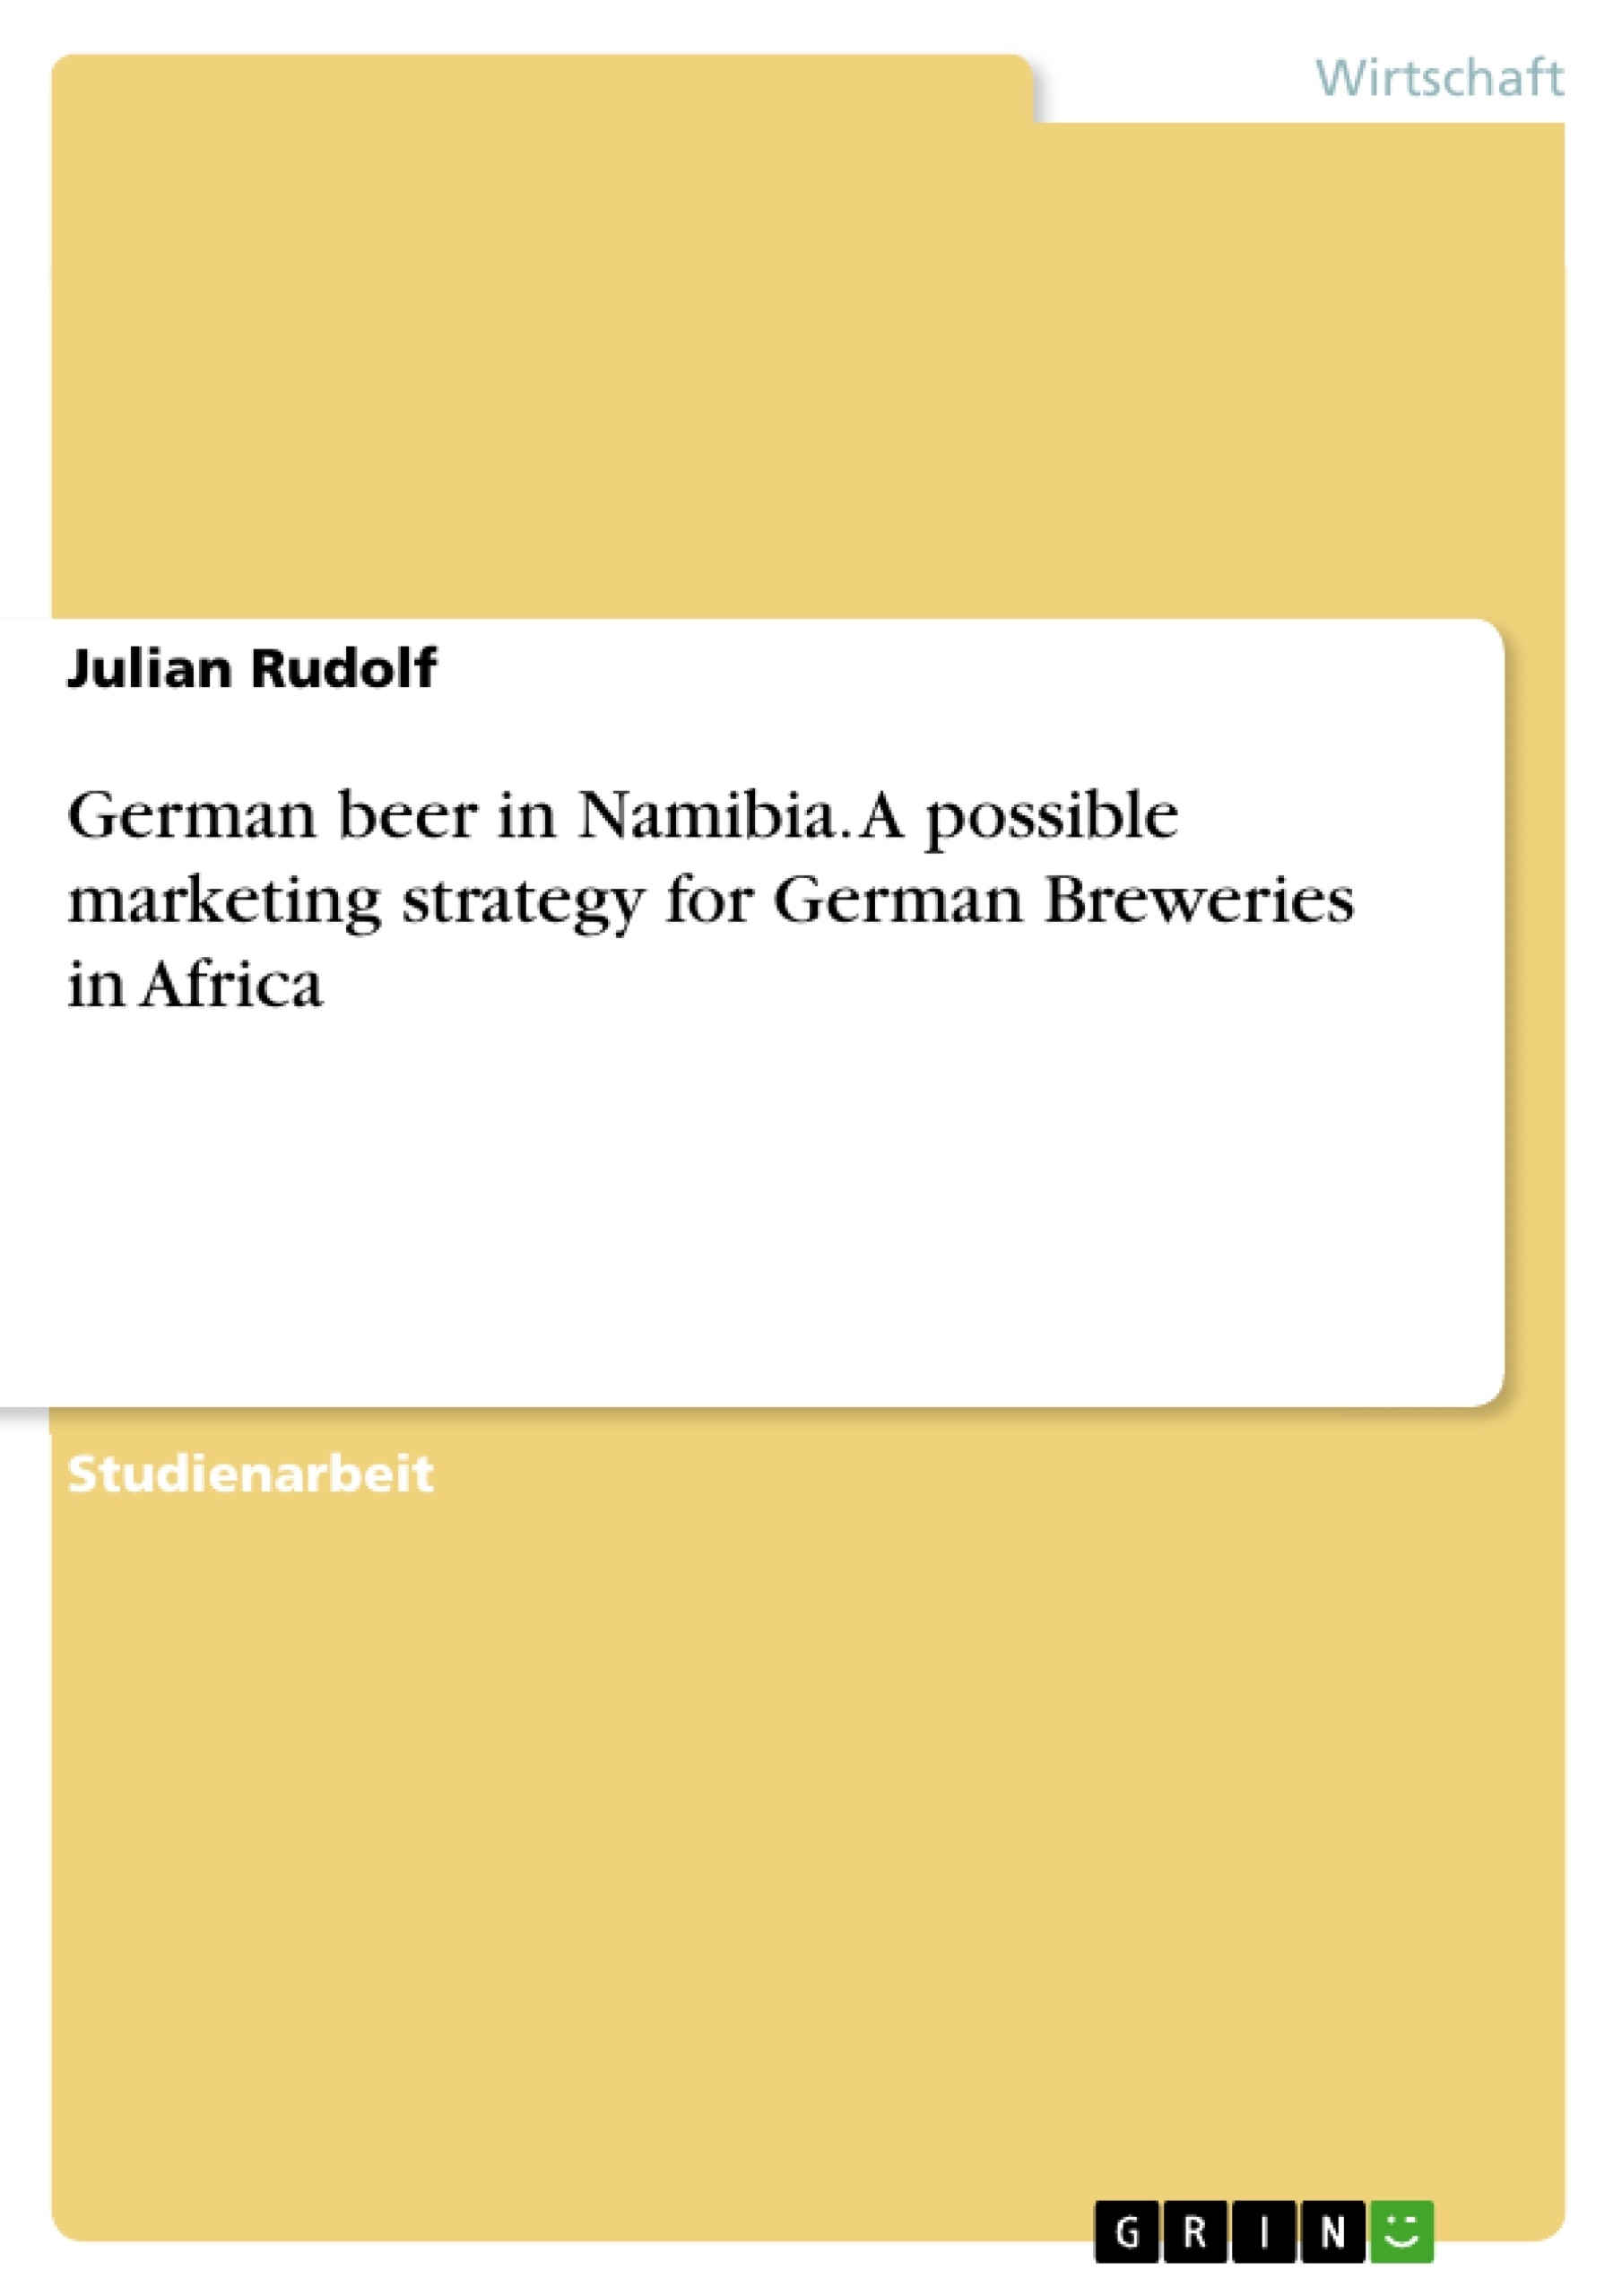 Titel: German beer in Namibia. A possible marketing strategy for German Breweries in Africa